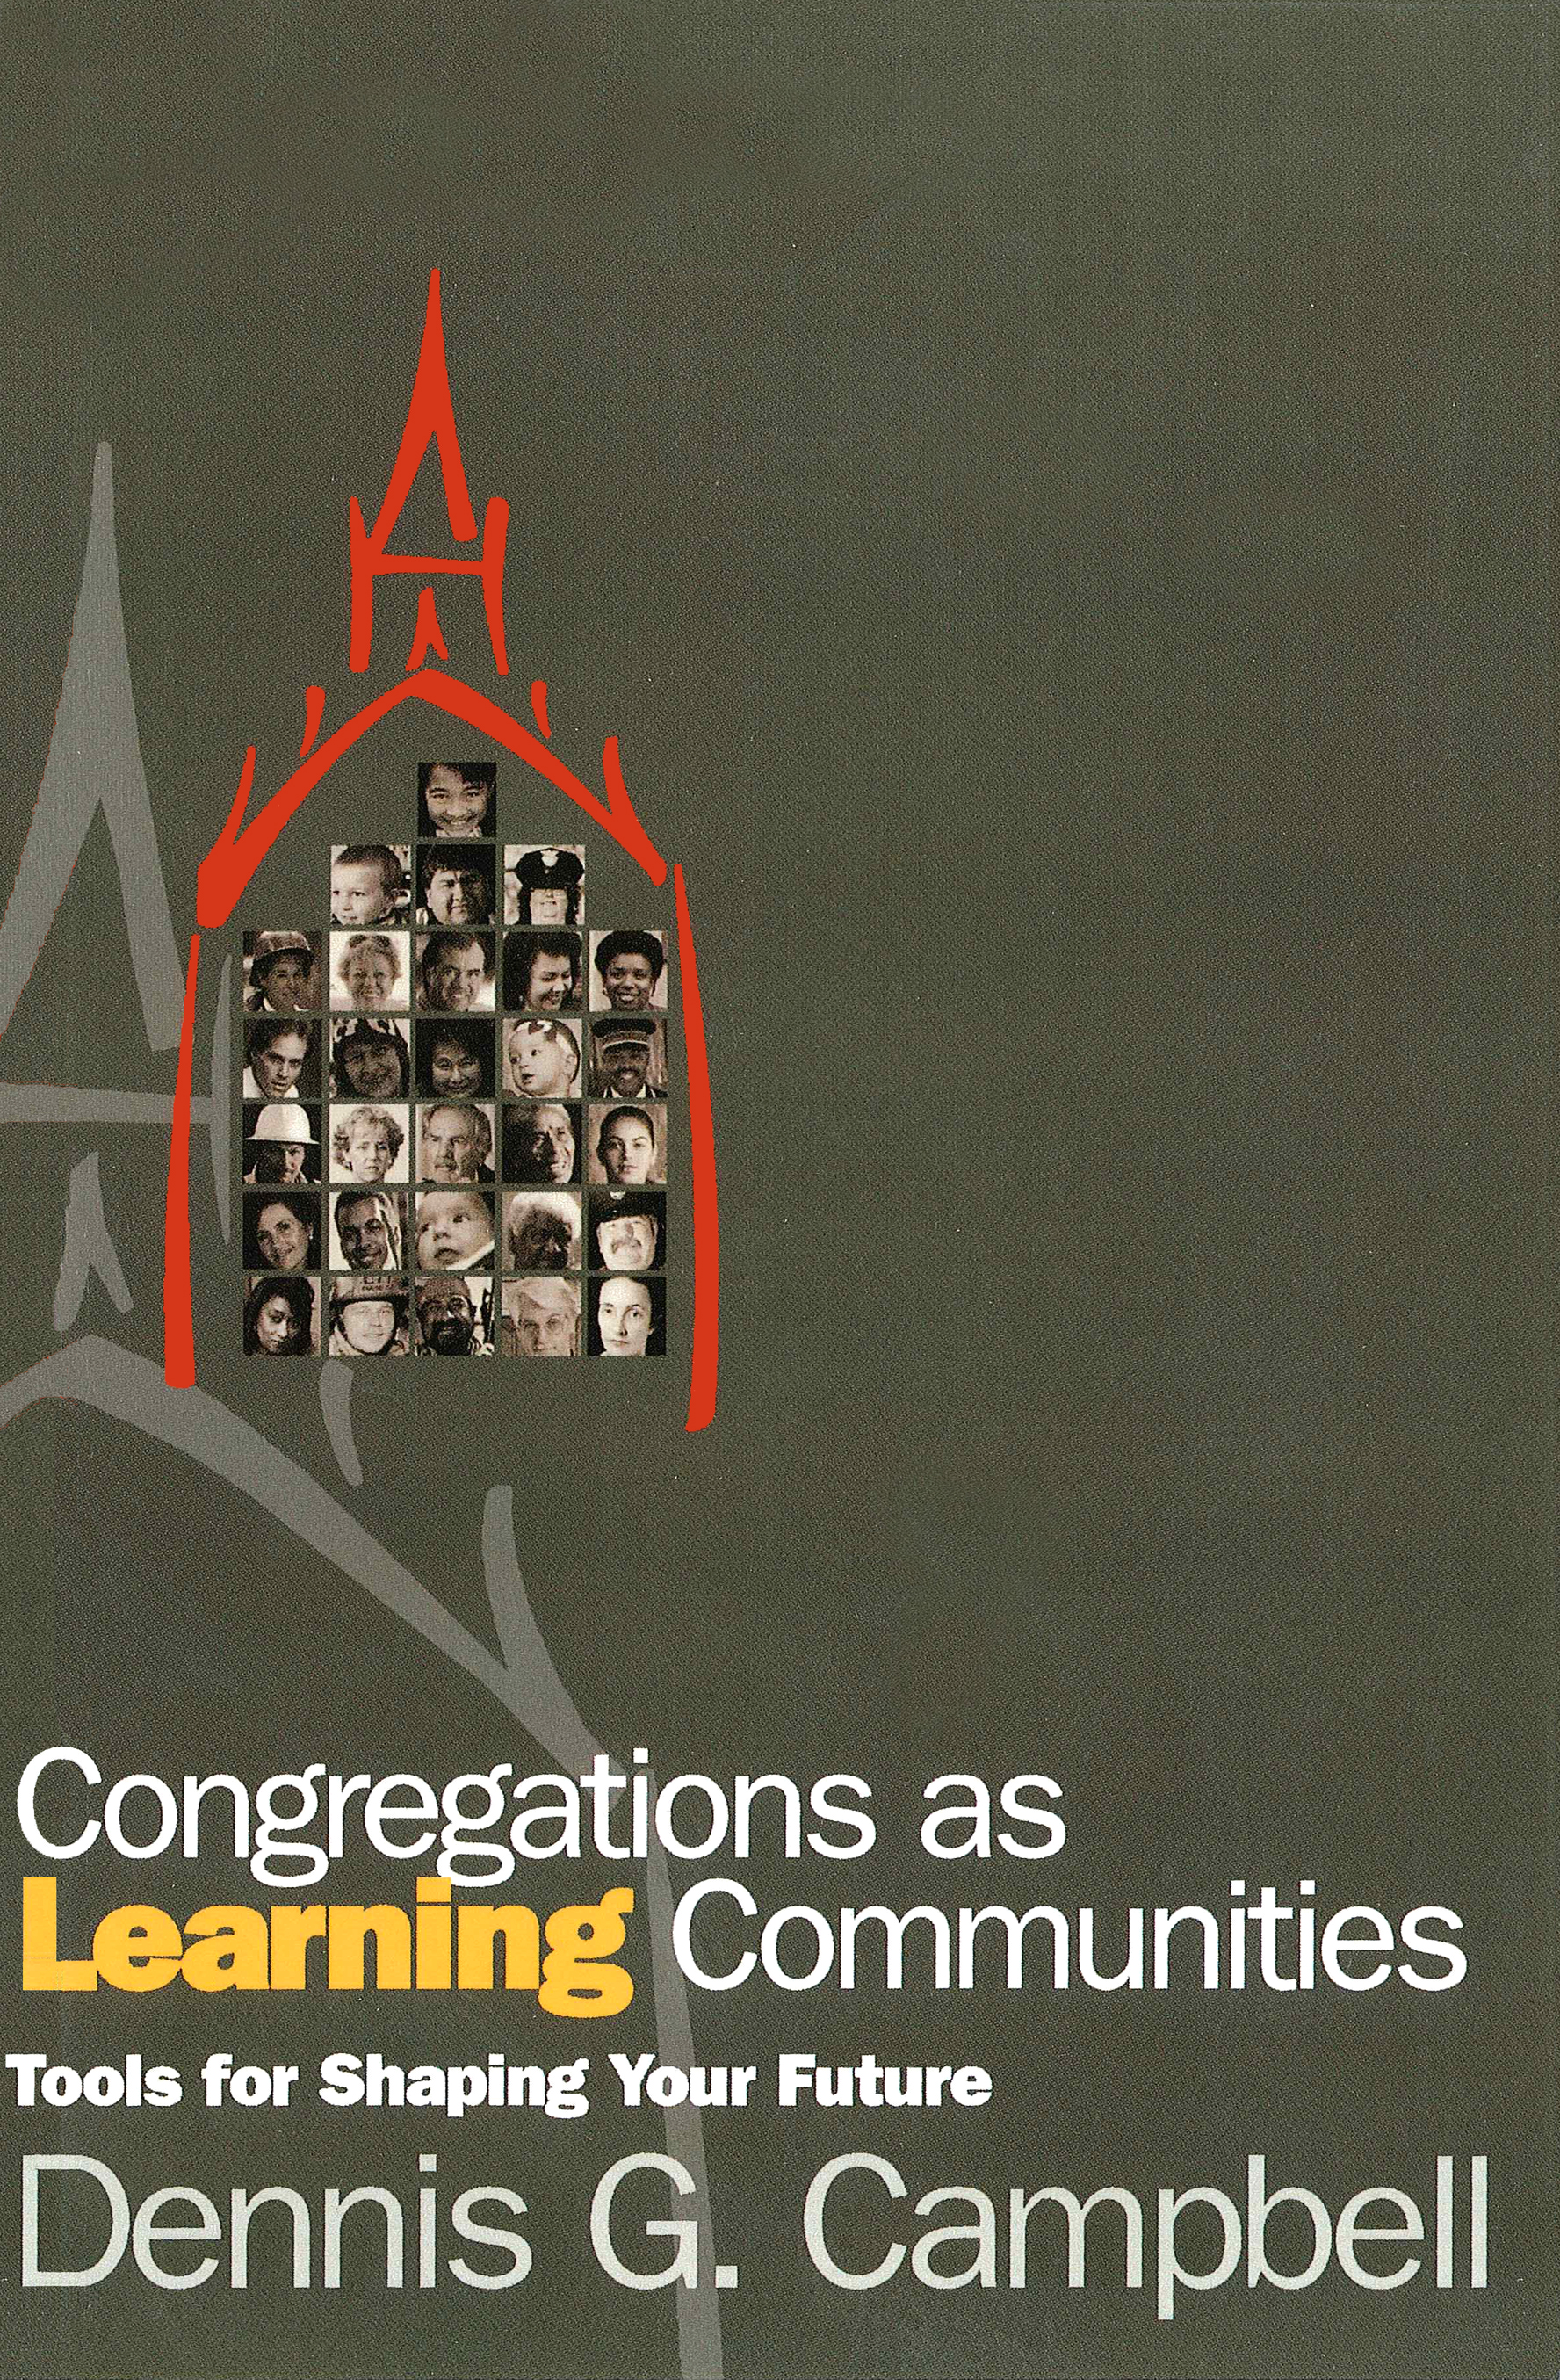 Congregations as Learning Communities: Tools for Shaping Your Future